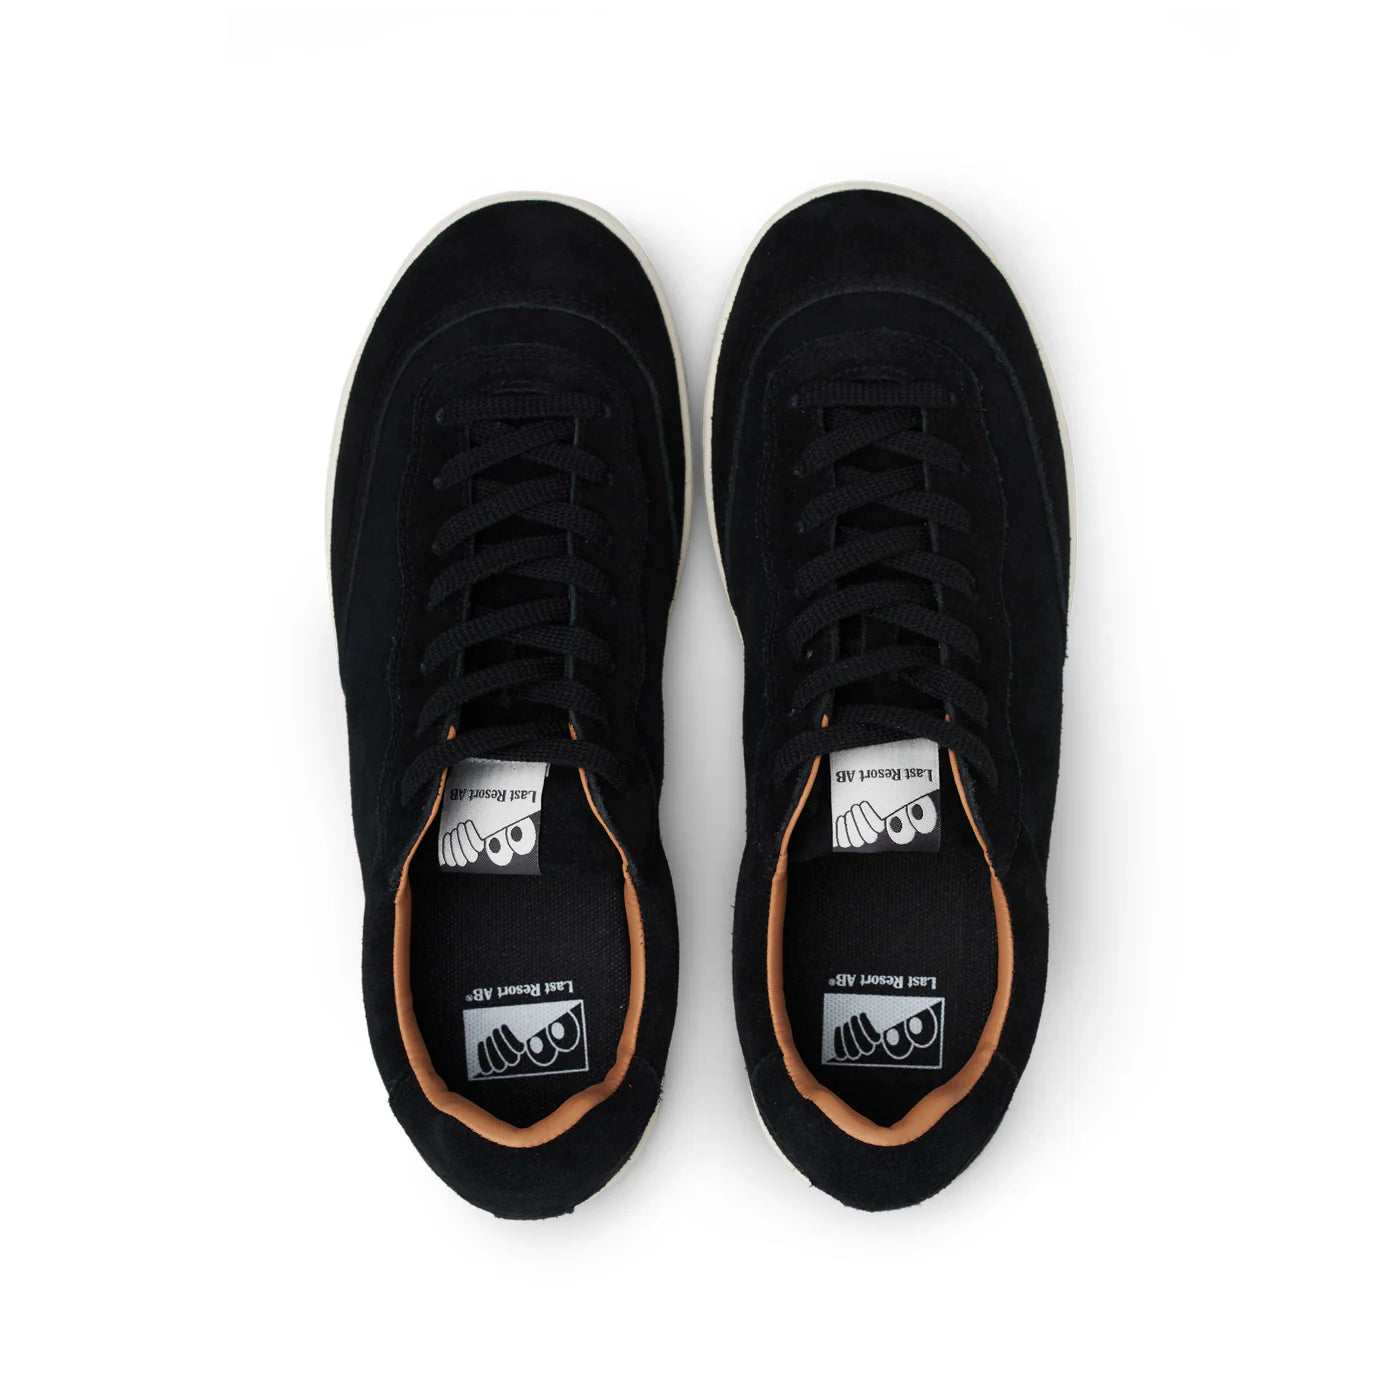 Last Resort CM001 Suede / Leather Lo Black White Shoes